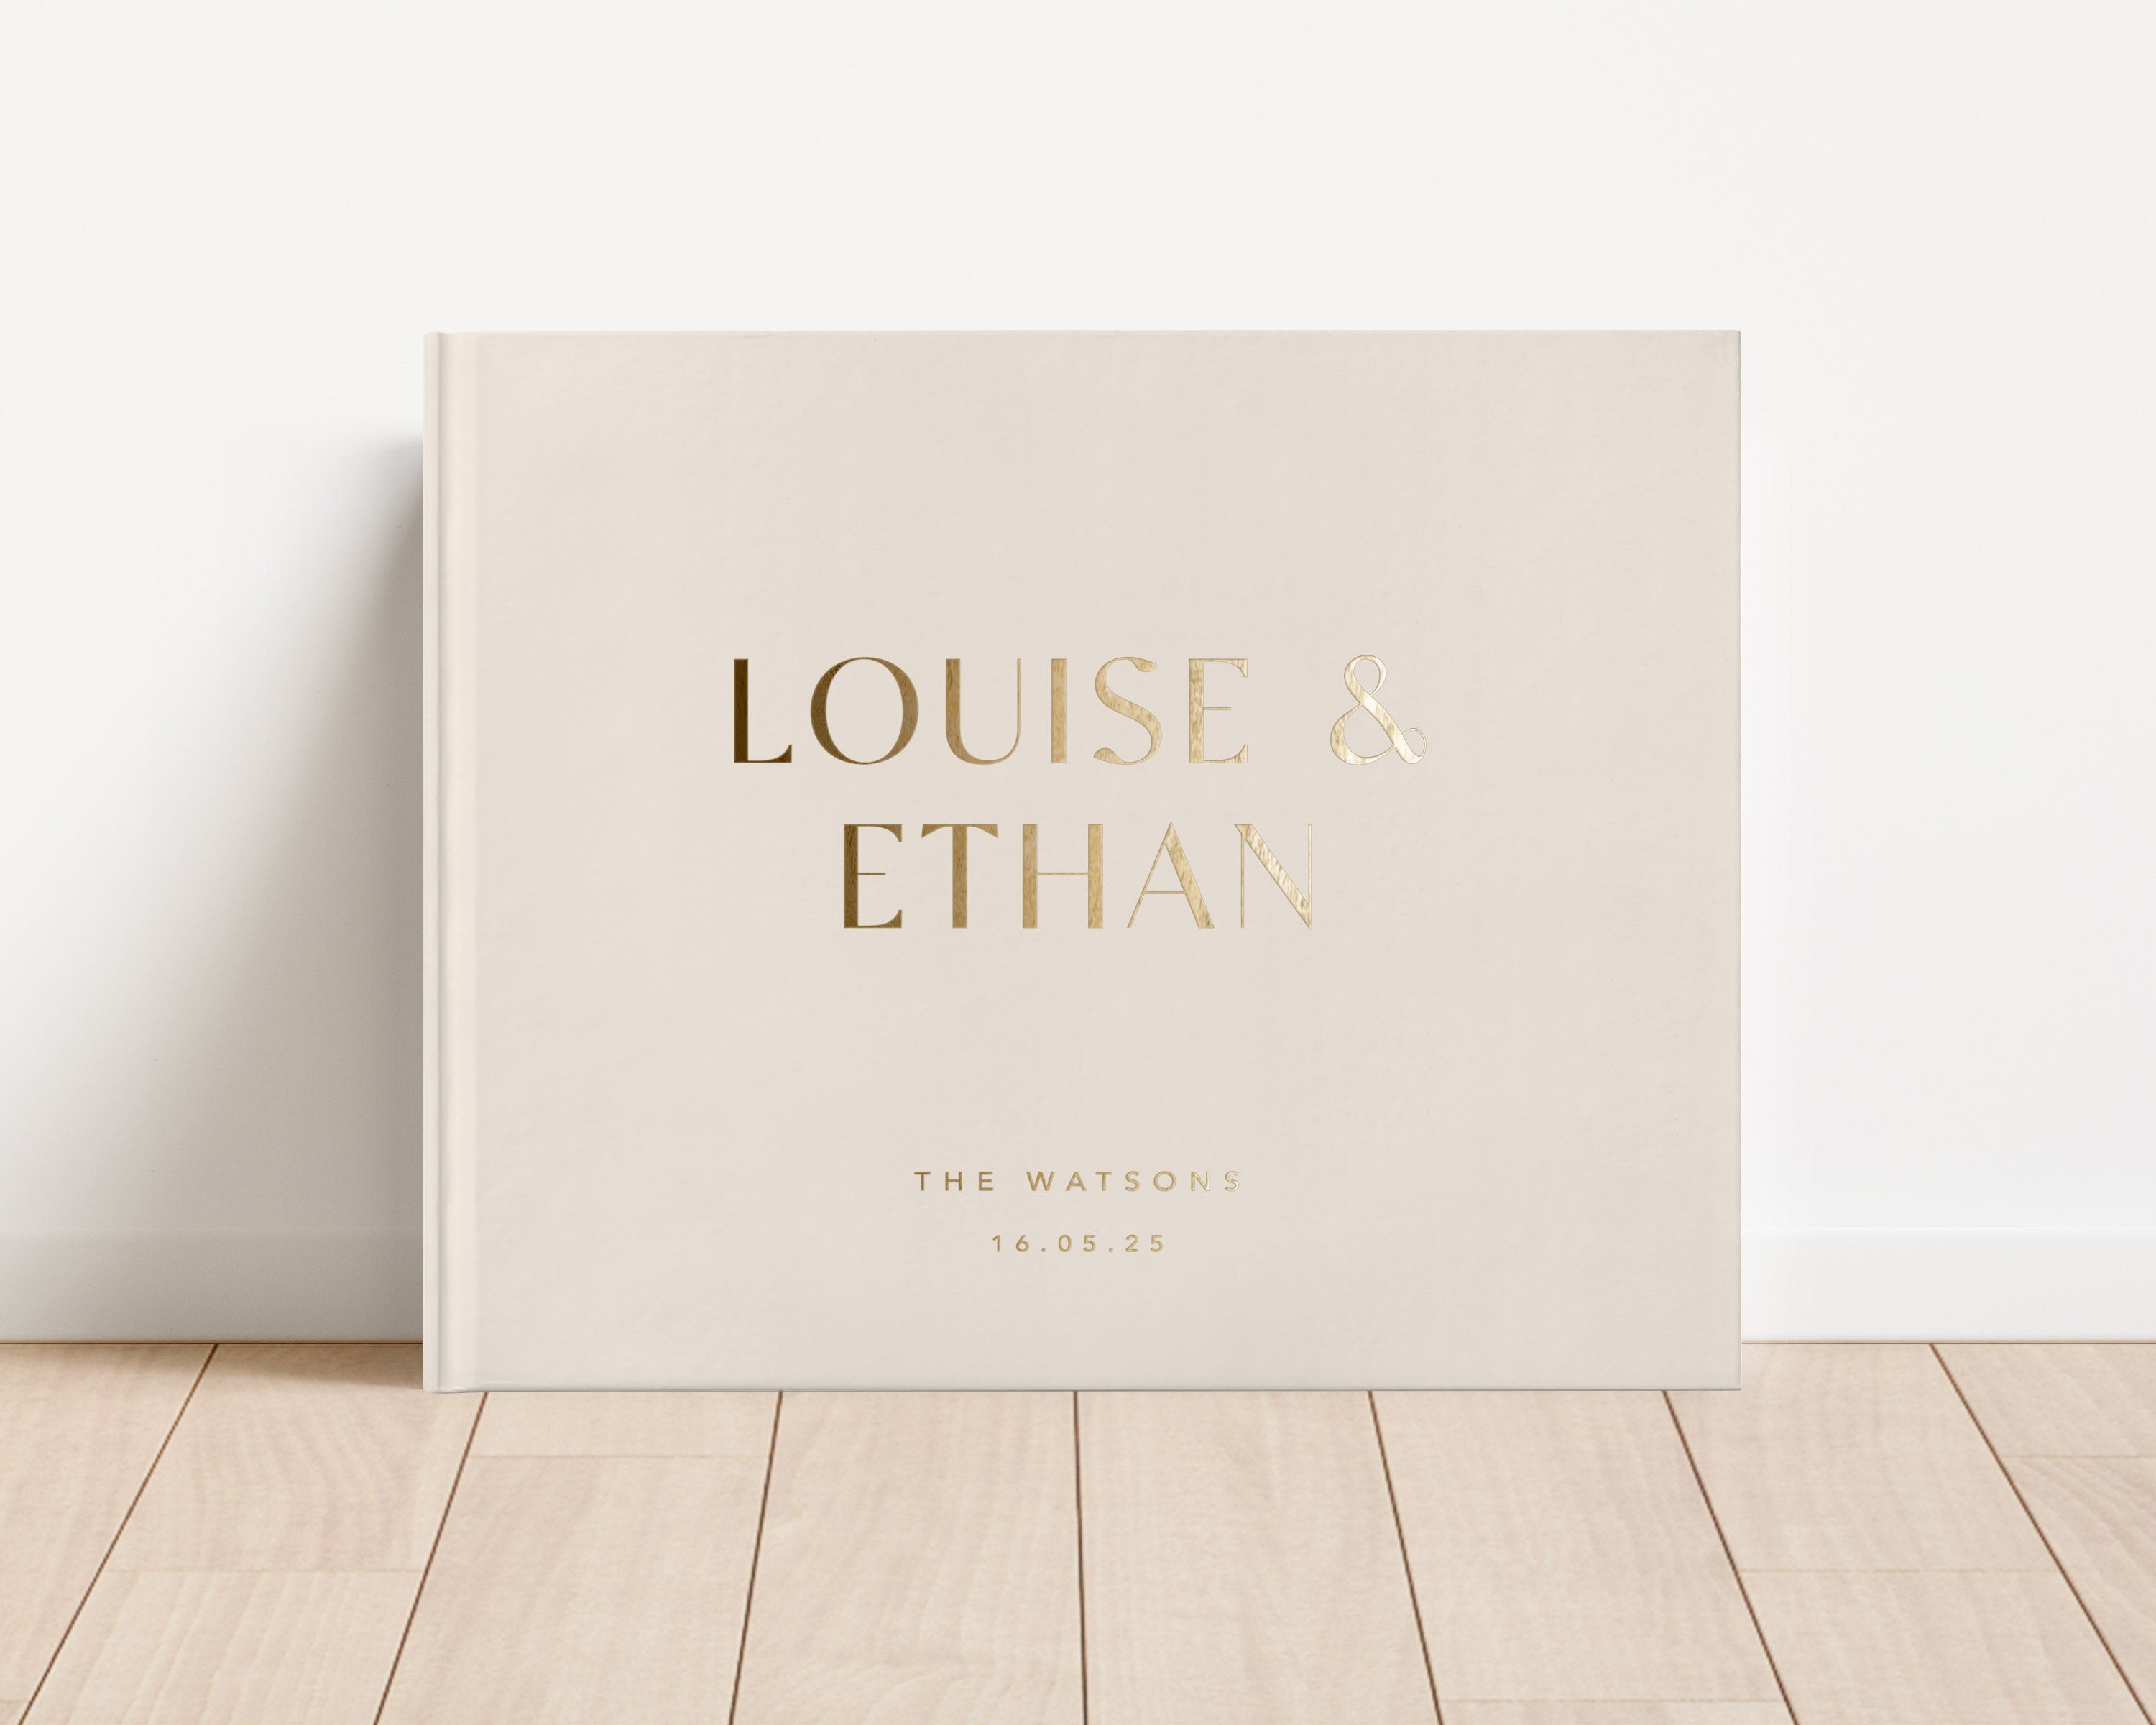 Luxury wedding guest book with custom gold foil text and cream hardback cover.